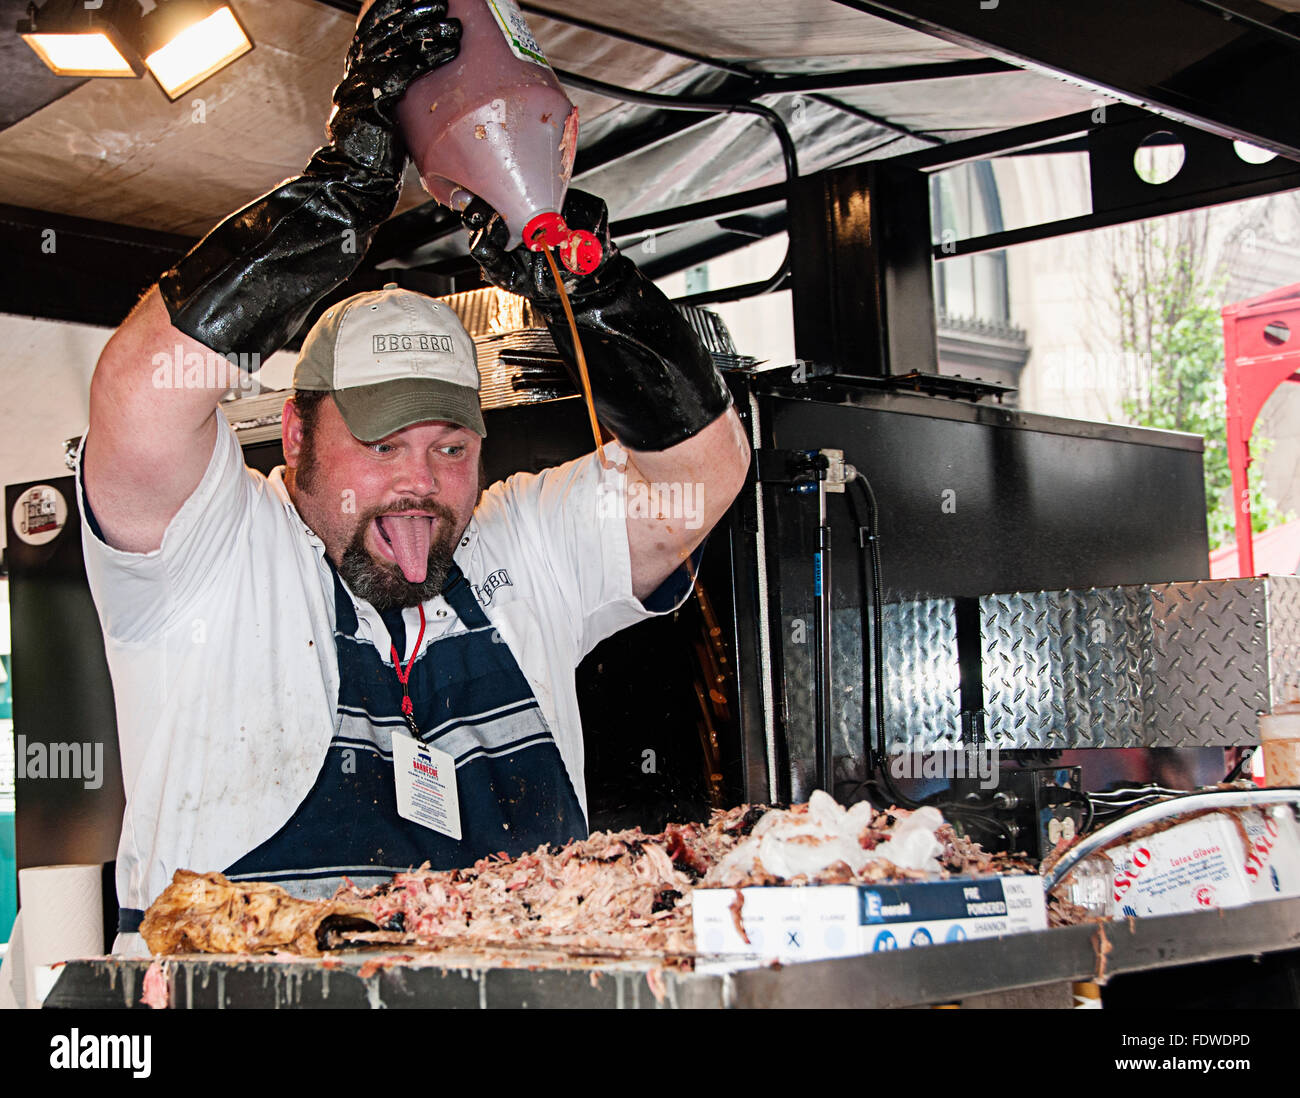 A pit cook at the BBG BBQ truck at the Big Apple BBQ spraying BBQ sauce on pulled pork. Stock Photo